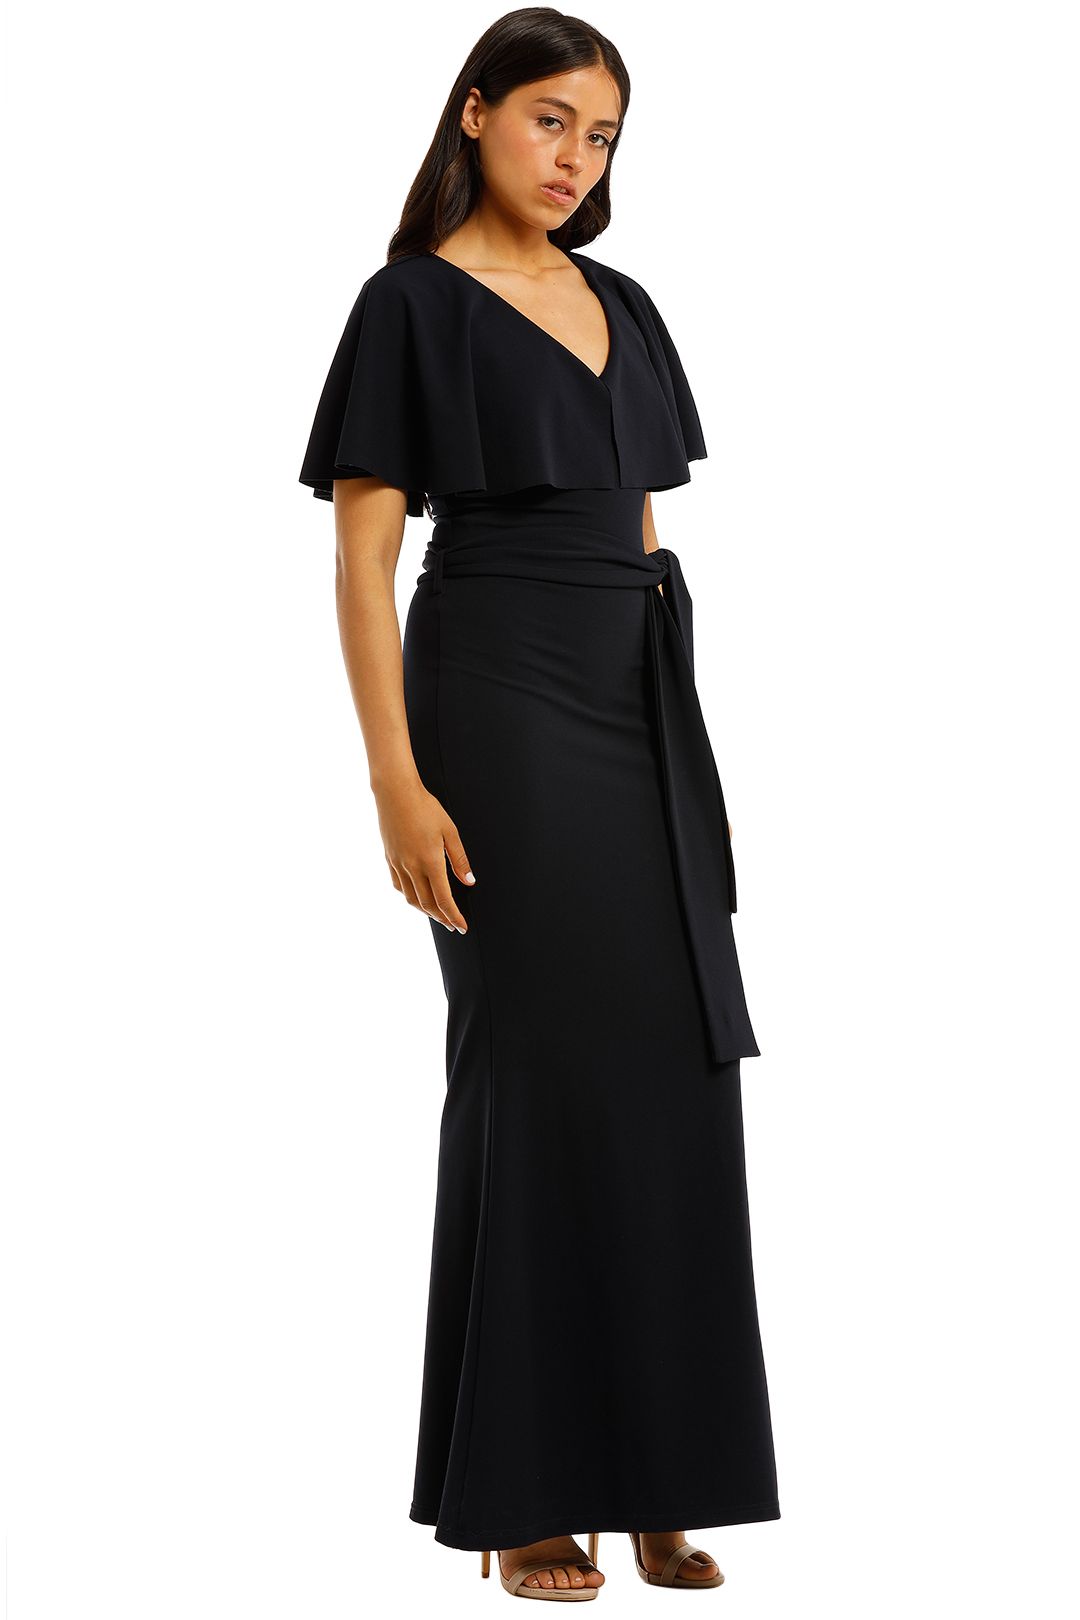 Pasduchas-Mrs-Carter-Gown-Navy-Side